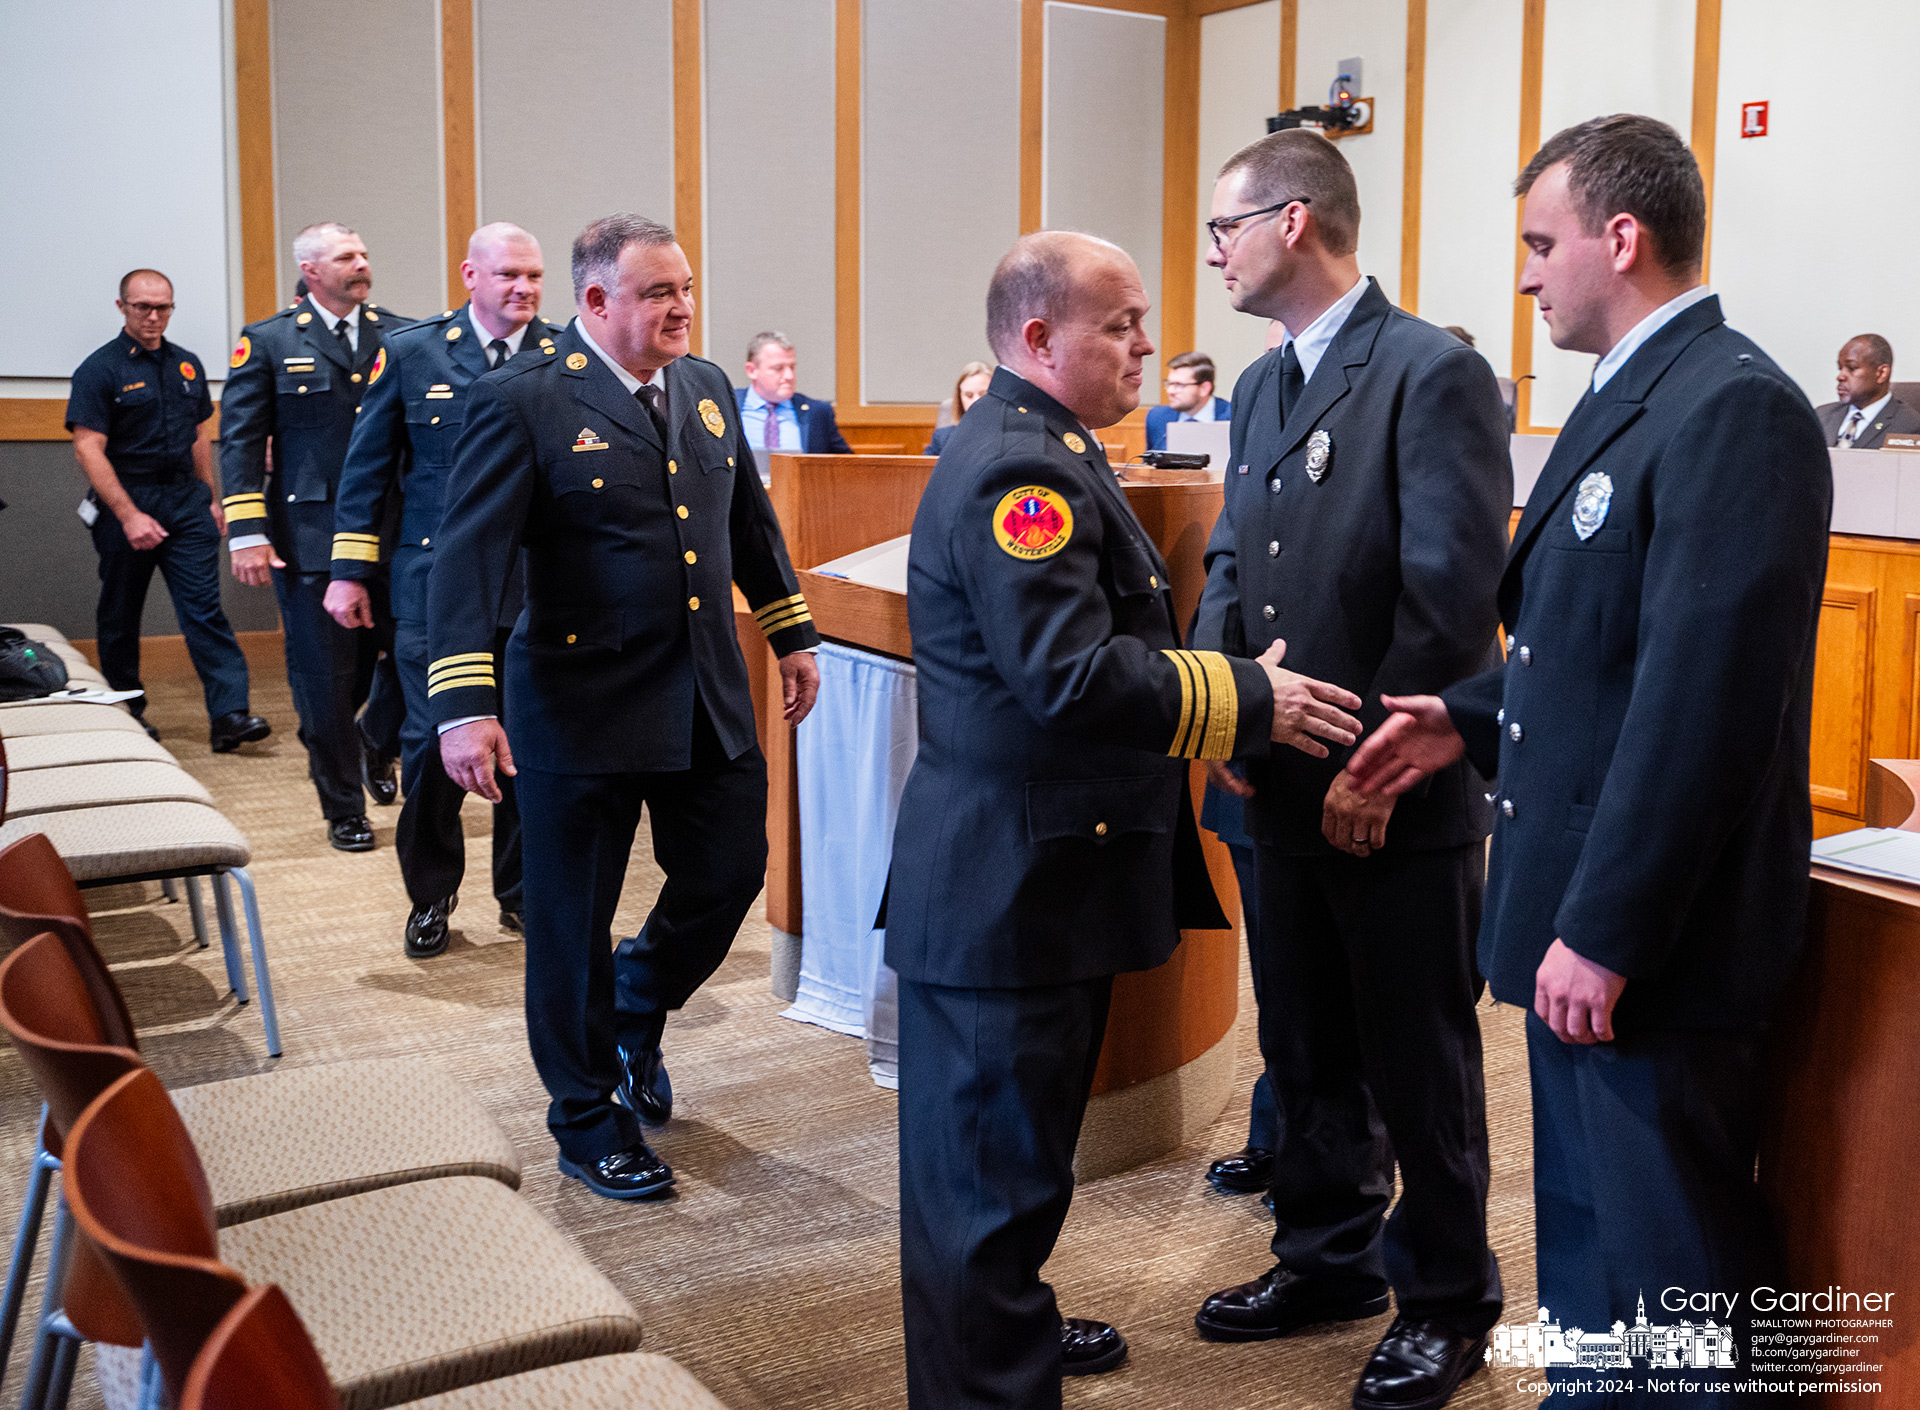 Westerville Fire Chief Brian Miller, trailed by other members of the fire department, shakes hands with the three firefighters sworn-in at the beginning of City Council Tuesday night. My Final Photo for June 4, 2024.